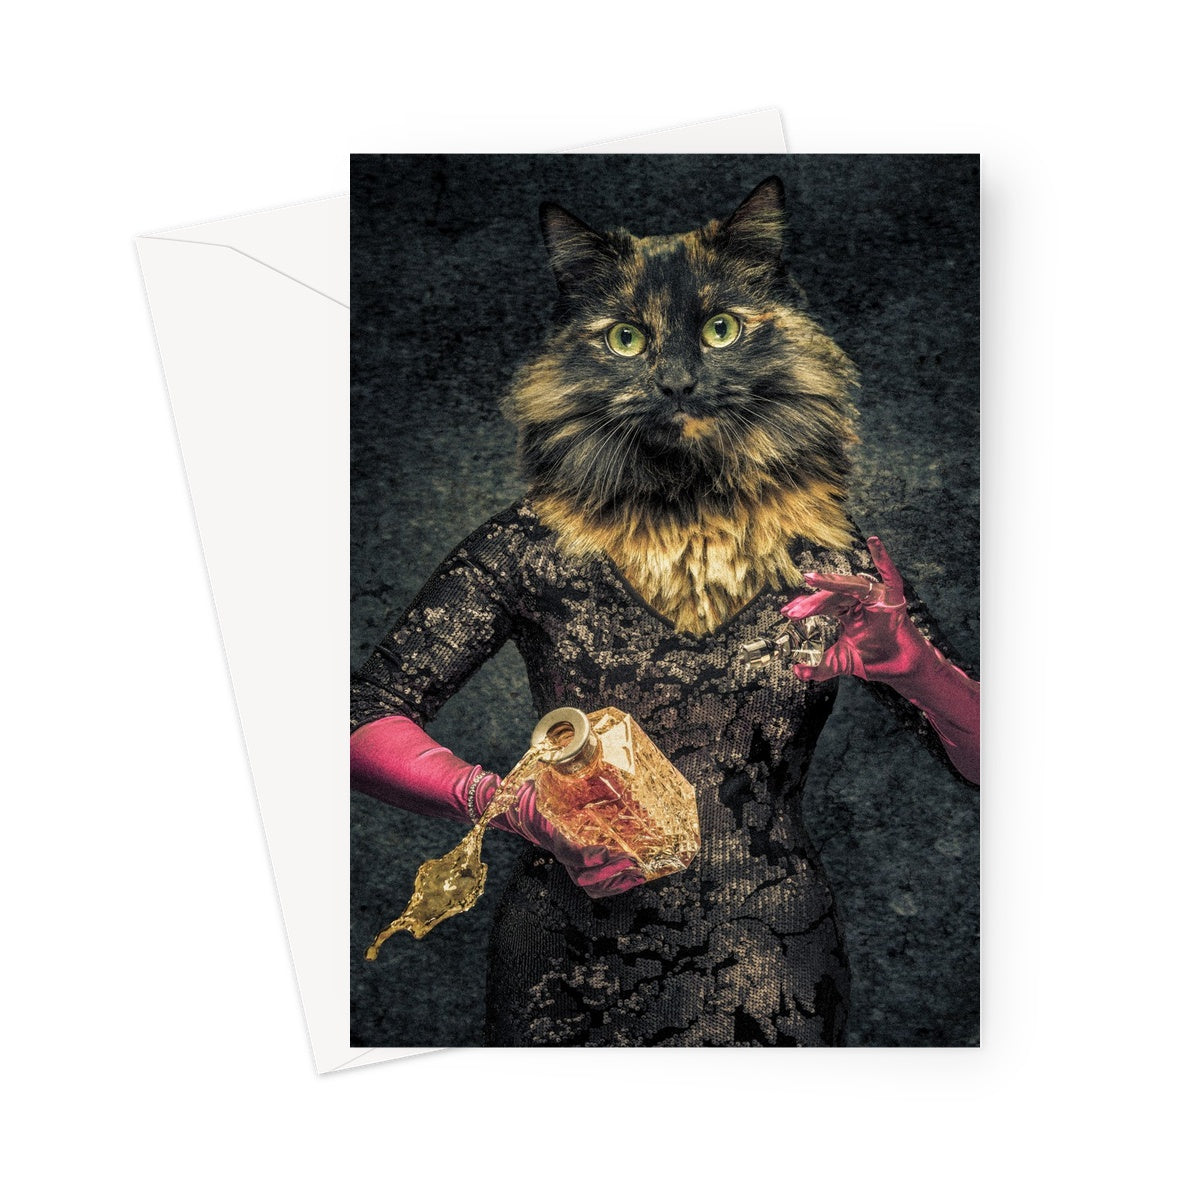 Anthropomorphic cat spilling drink from decanter Greeting Card